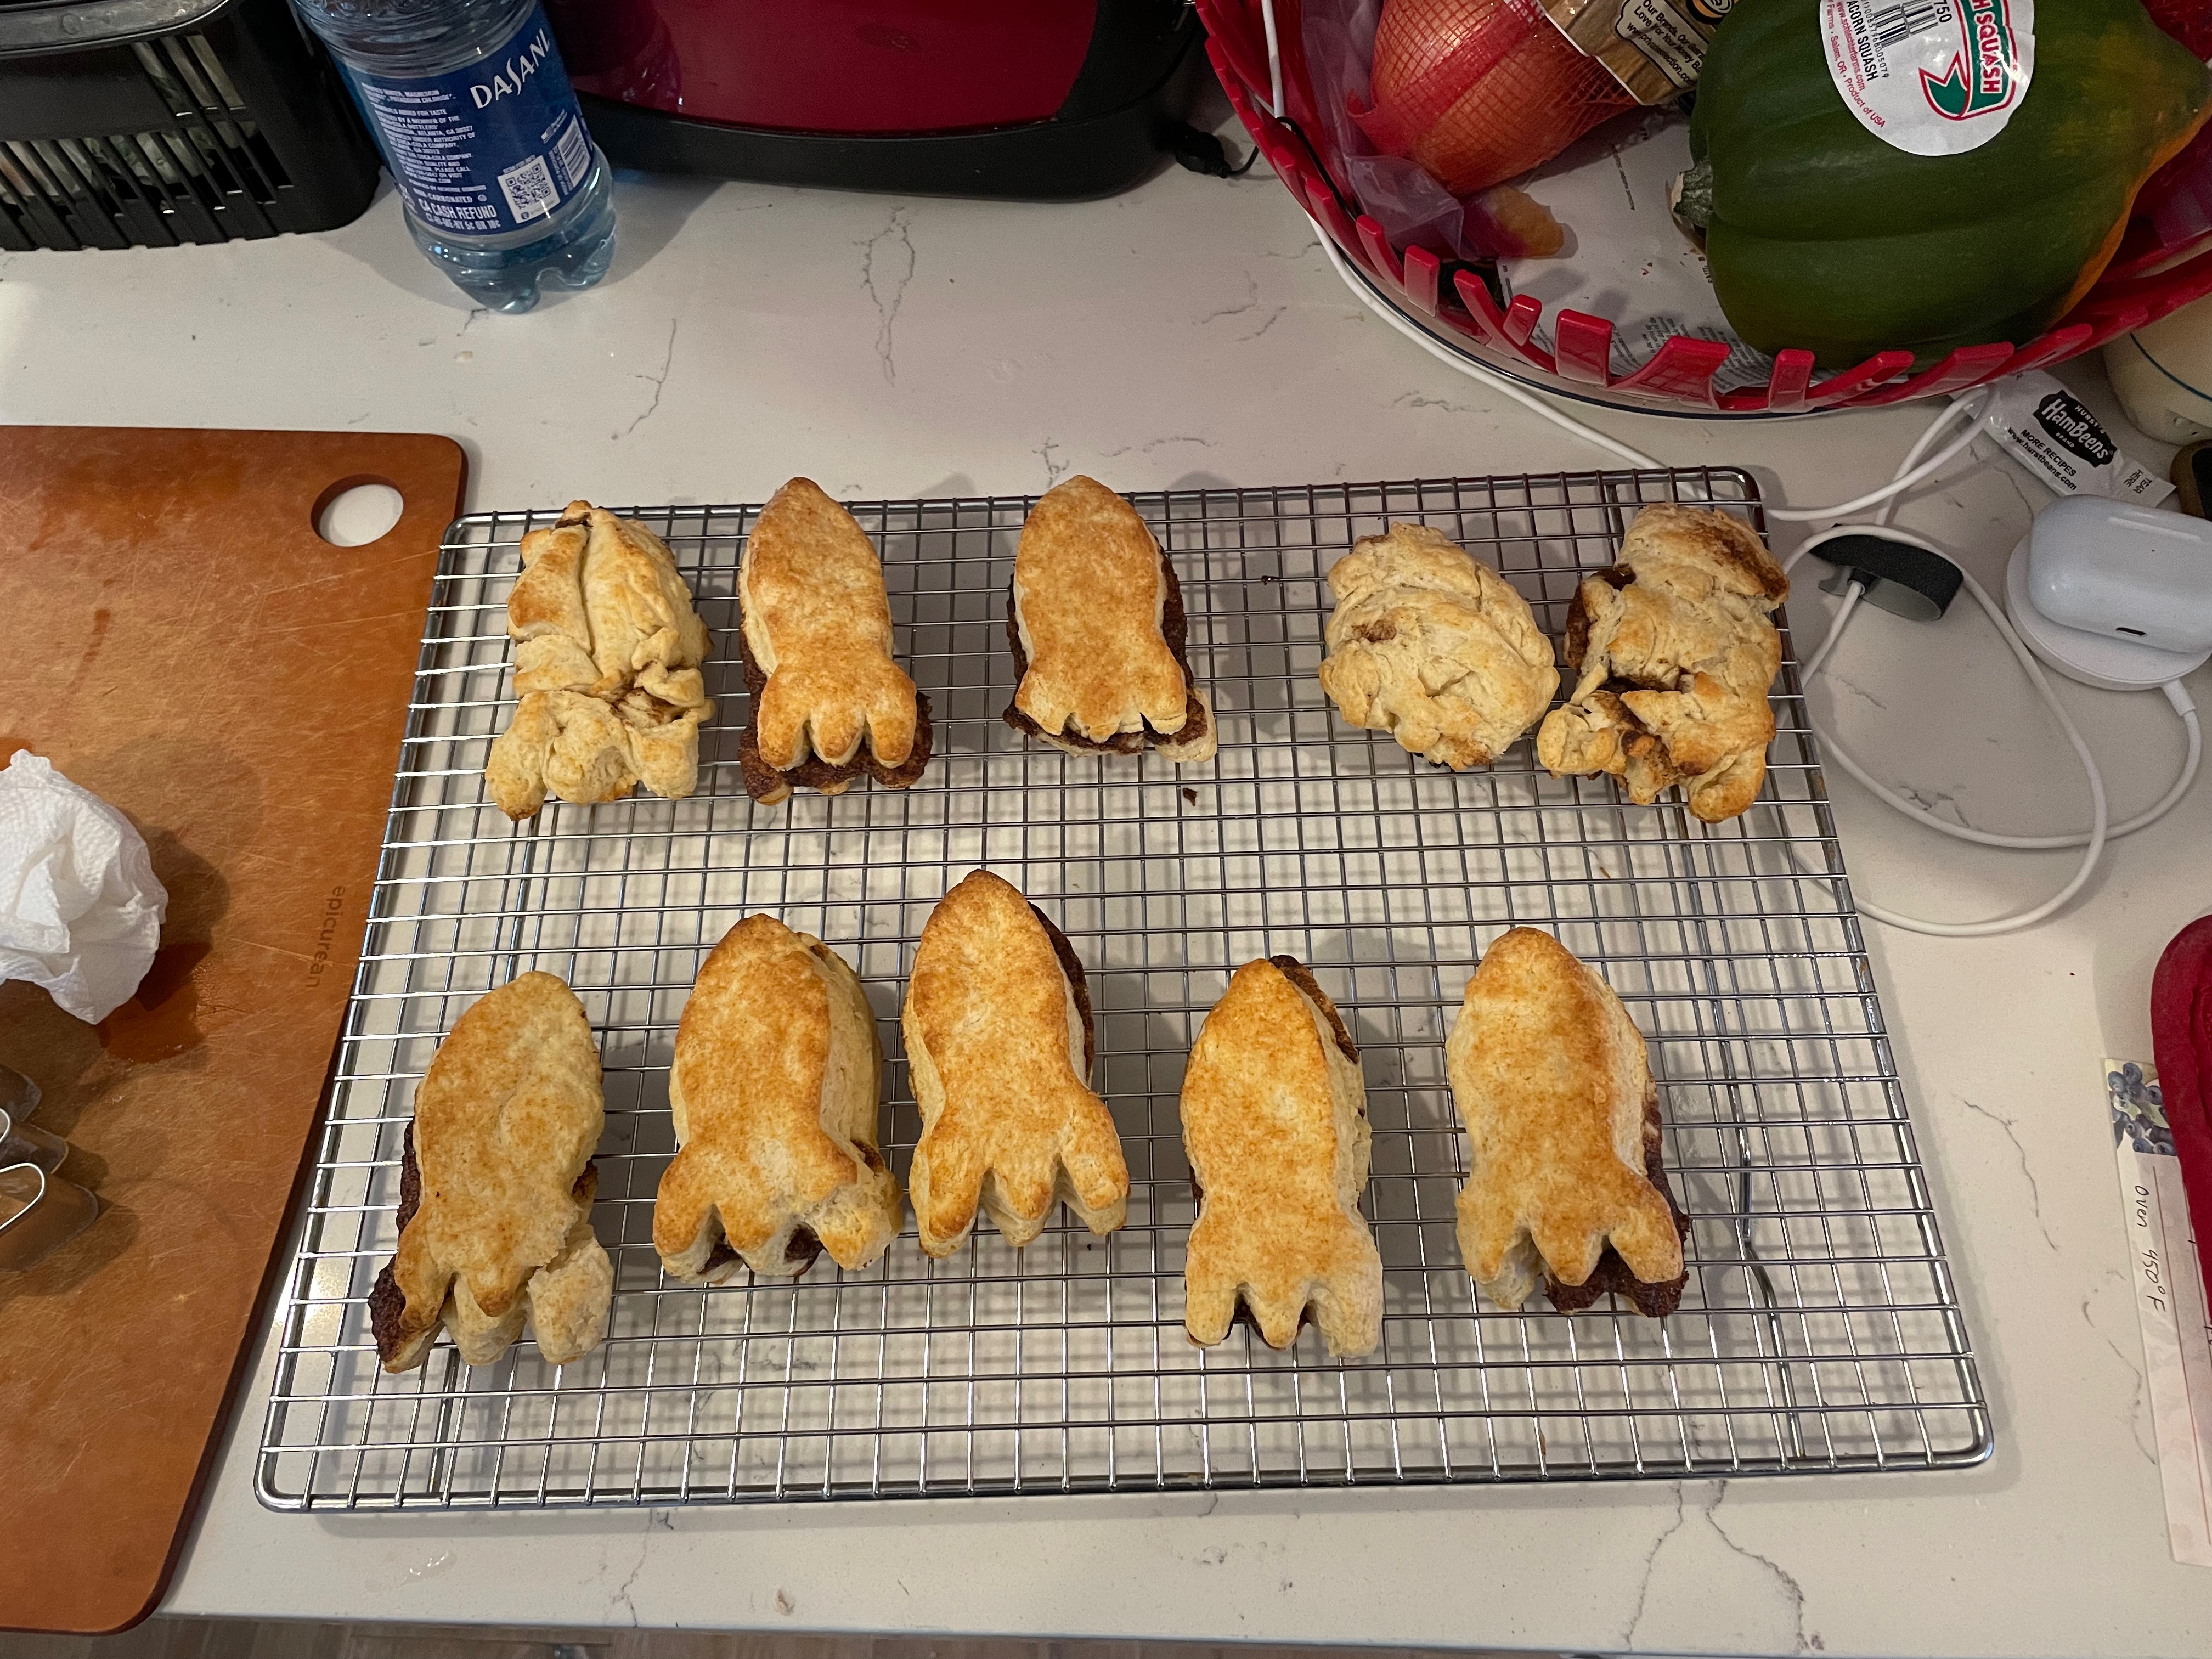 Rocket shaped biscuits.